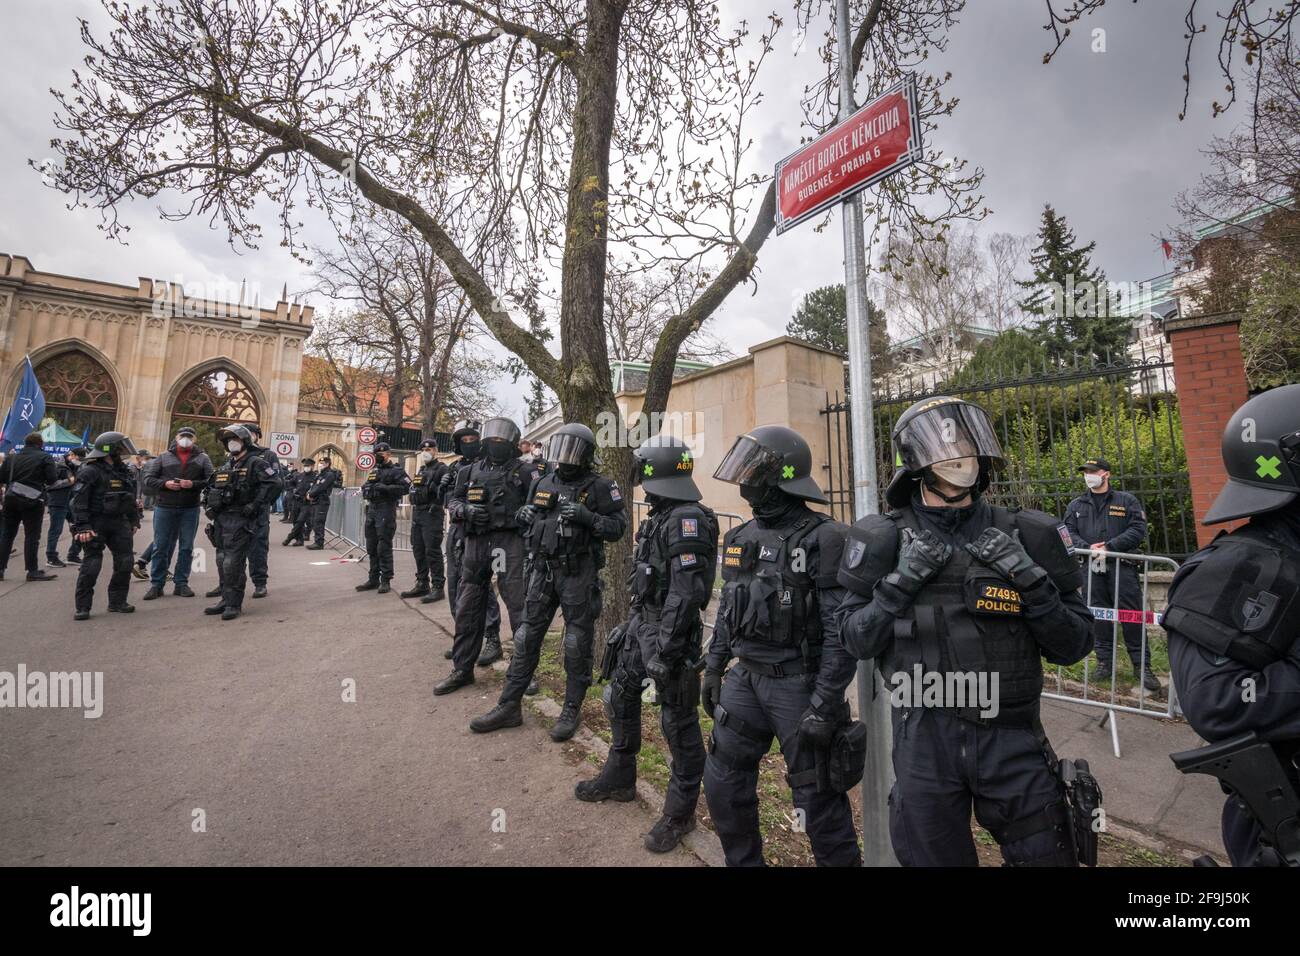 People protest outside the Russian Embassy in Prague, Czech Republic, April 18, 2021 against Putinist Russia and Russia's suspected involvement in an Stock Photo